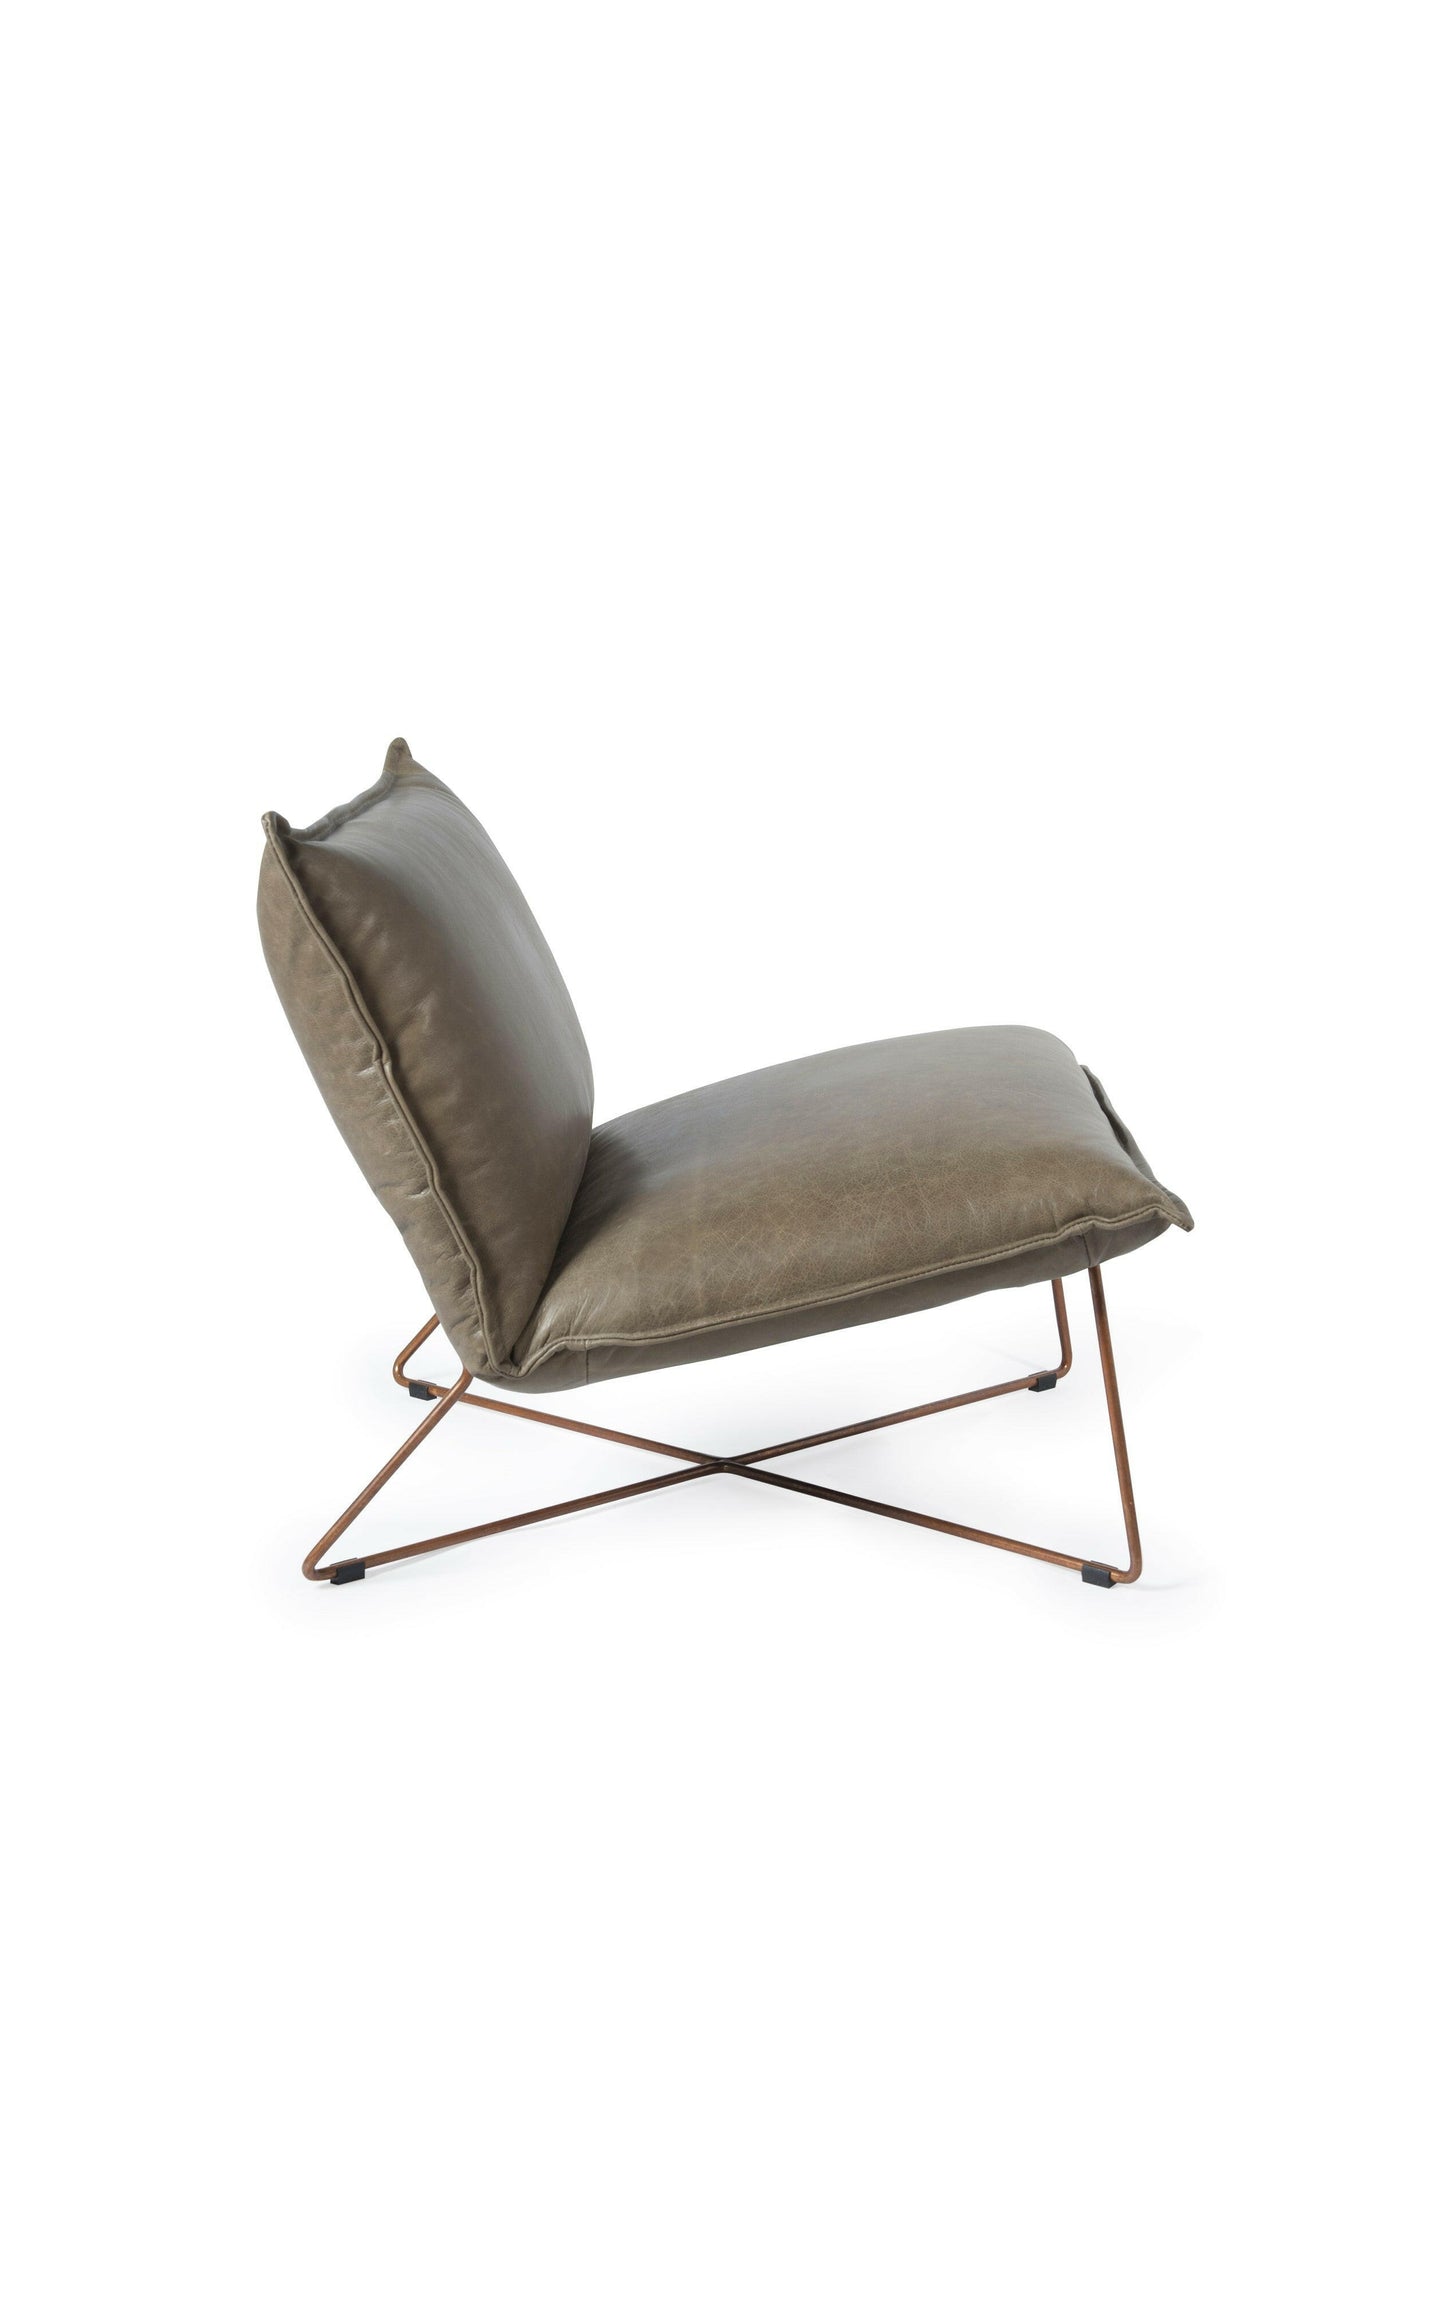 Earl Lowback 12mm Copper Frame - Lounge Chairs.